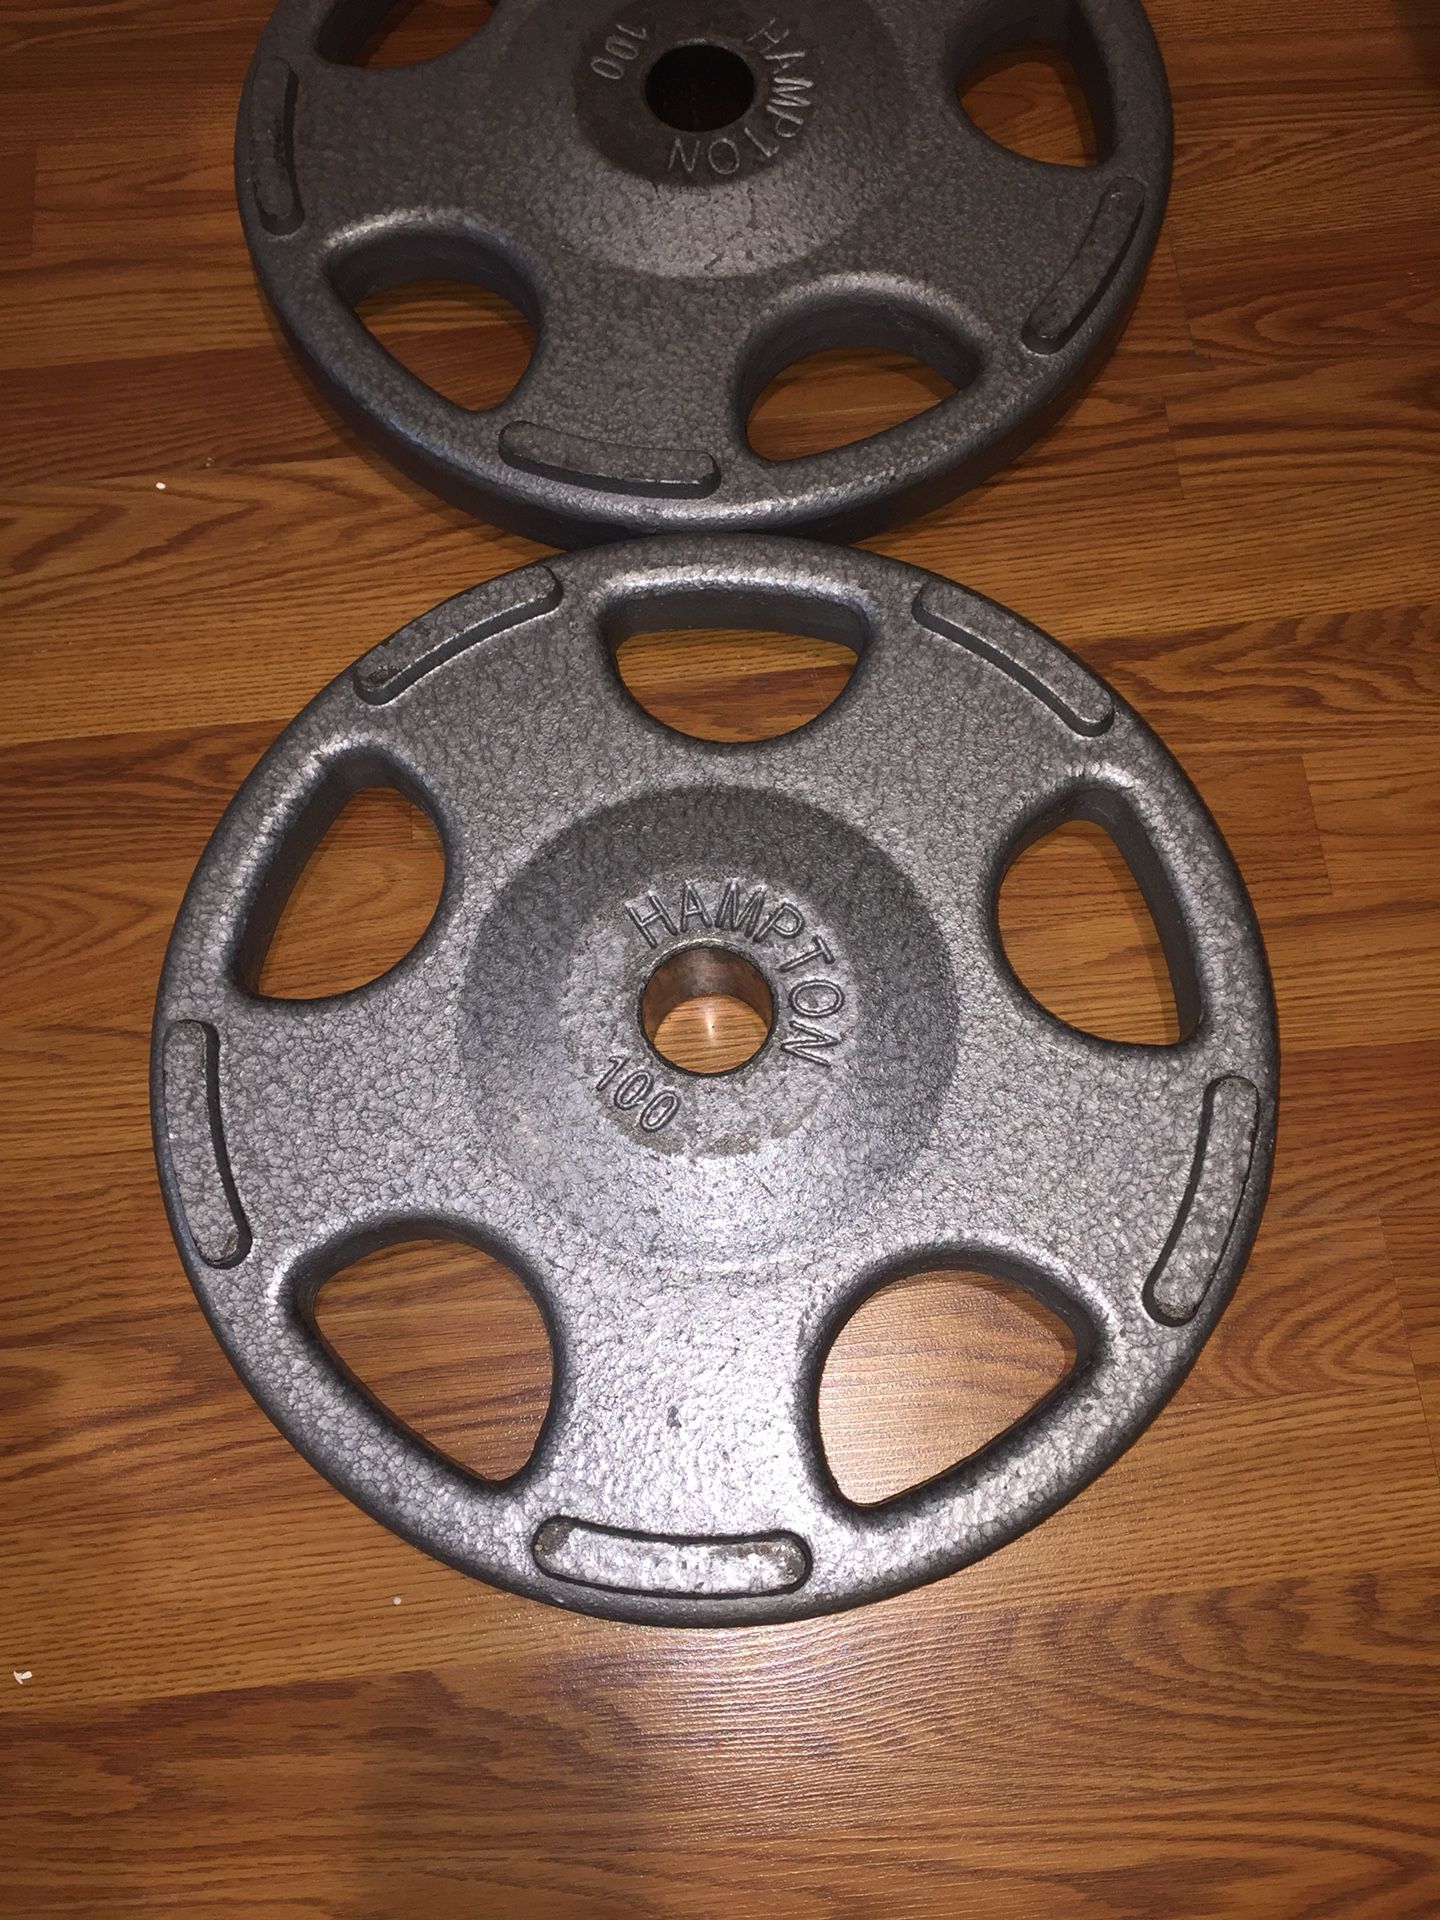 100lb Olympic weight plates